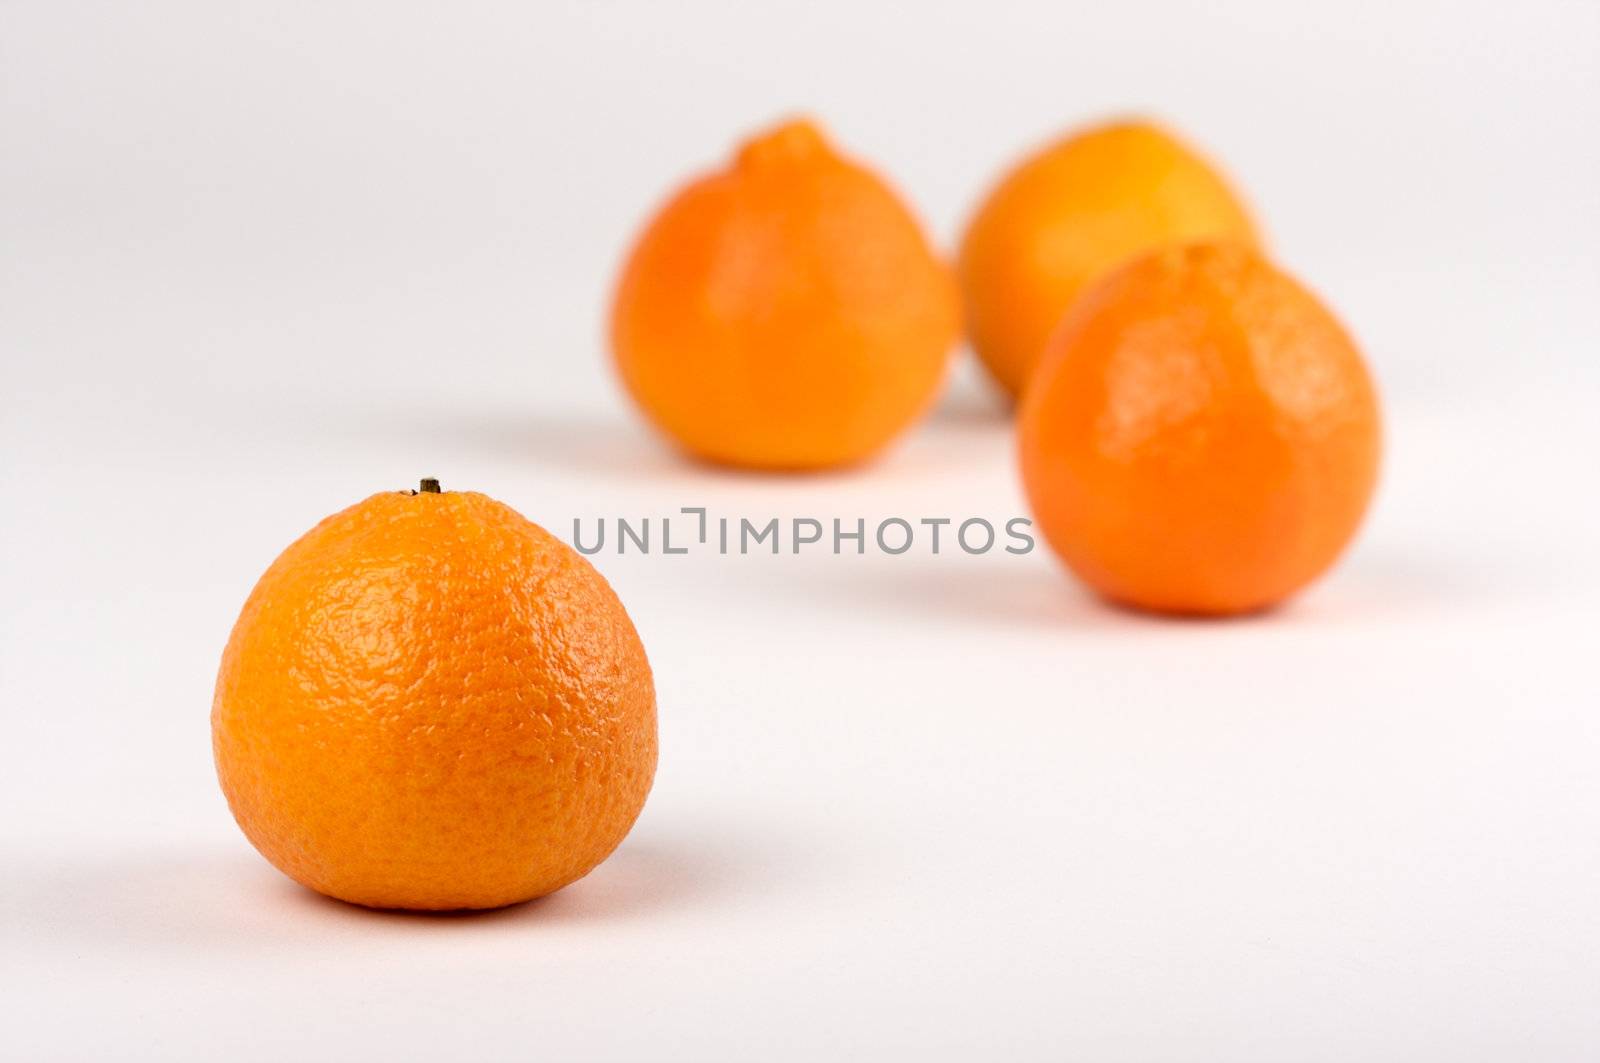 Clementine Oranges on a White Background